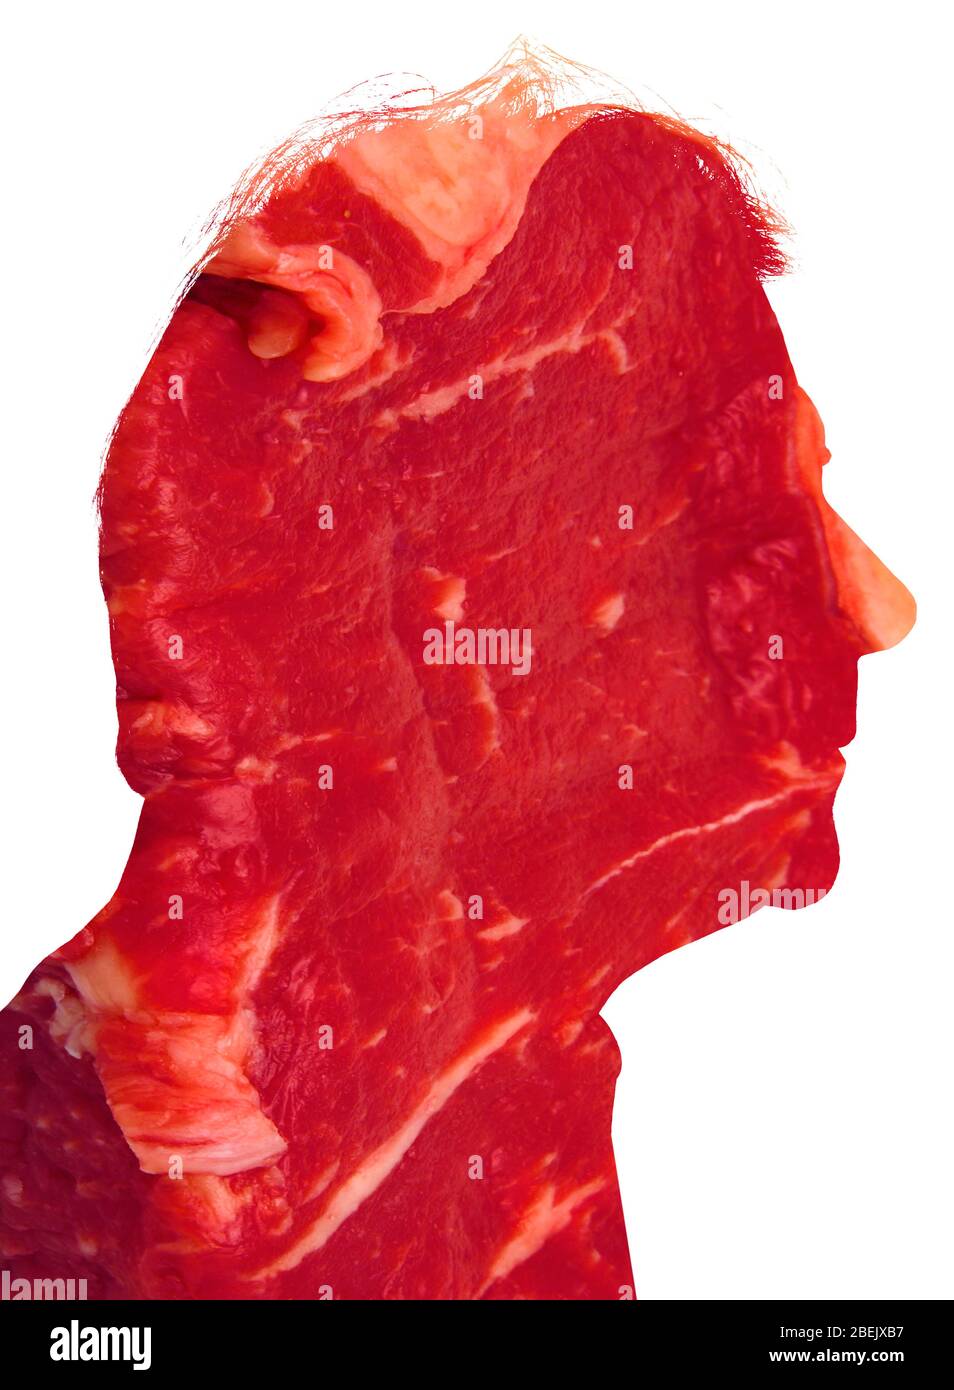 Meat eating. Stock Photo